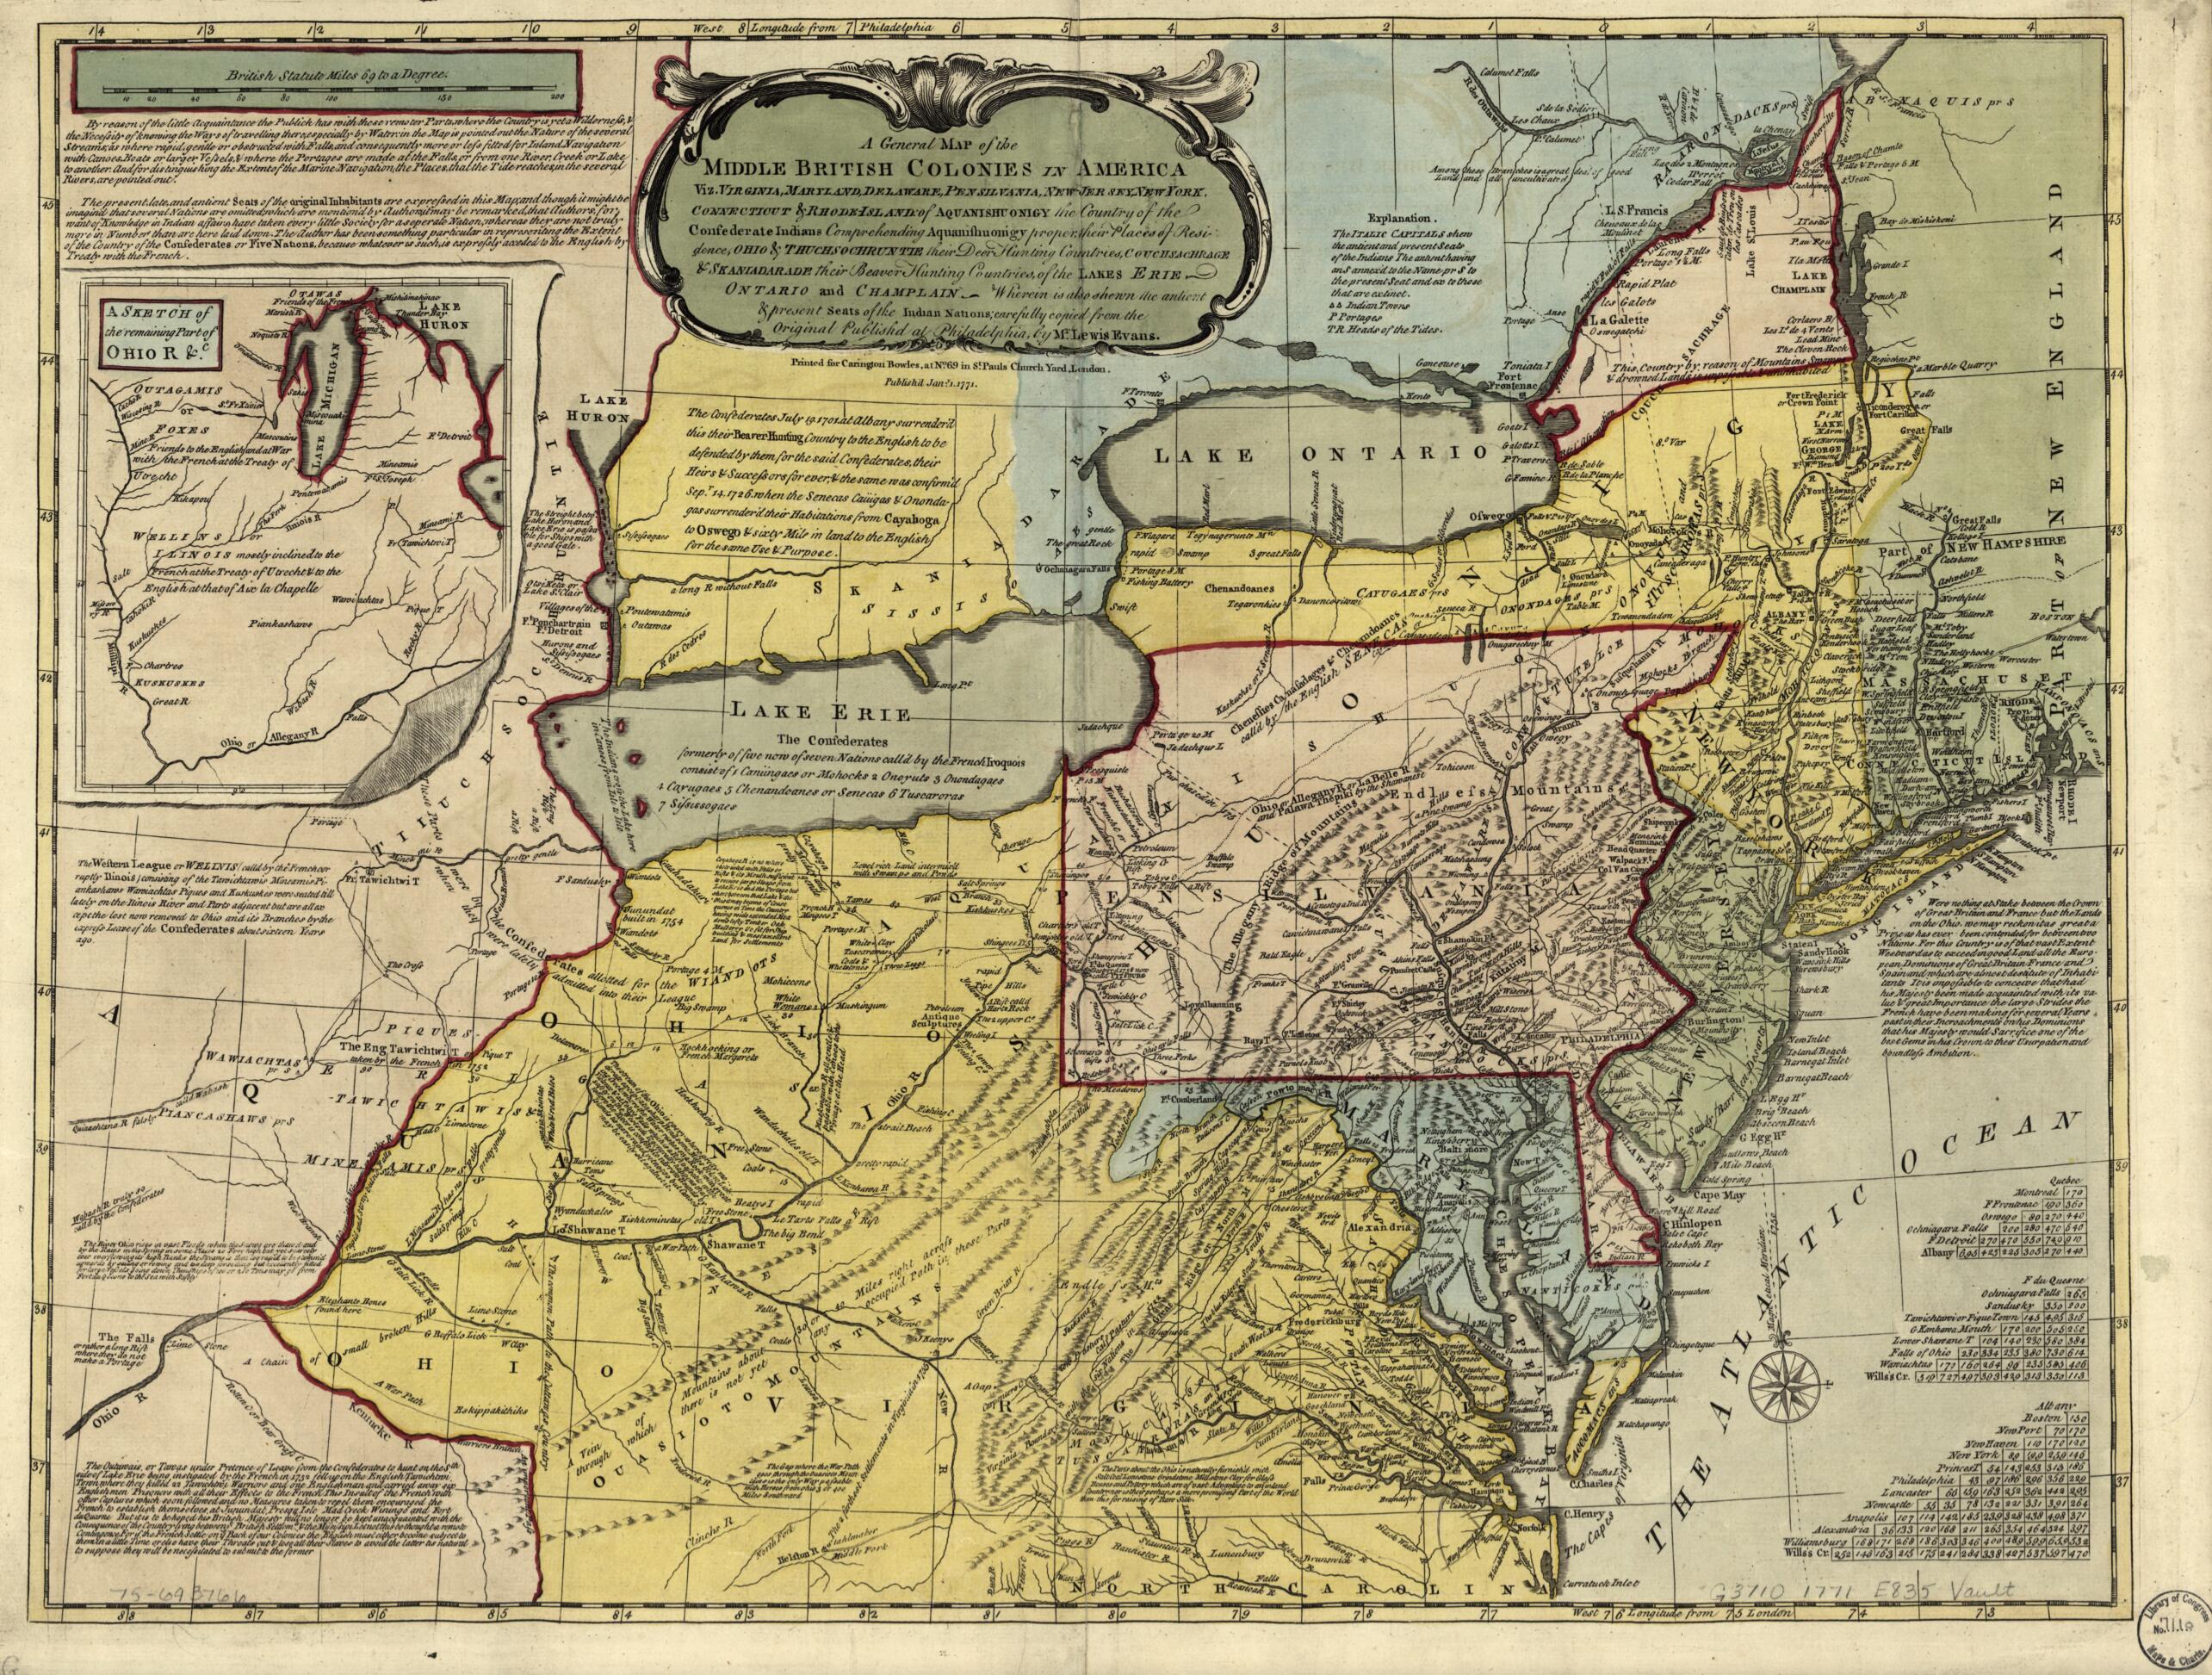 This old map of Jersey, New York, Connecticut &amp; Rhode-Island: of Aquanishuonigy the Country of the Confederate Indians Comprehending Aquanishuonigy Proper, Their Places of Residence, Ohio &amp; Thuchsochruntie Their Deer Hunting Countries, Couchsachrage &amp; Sk